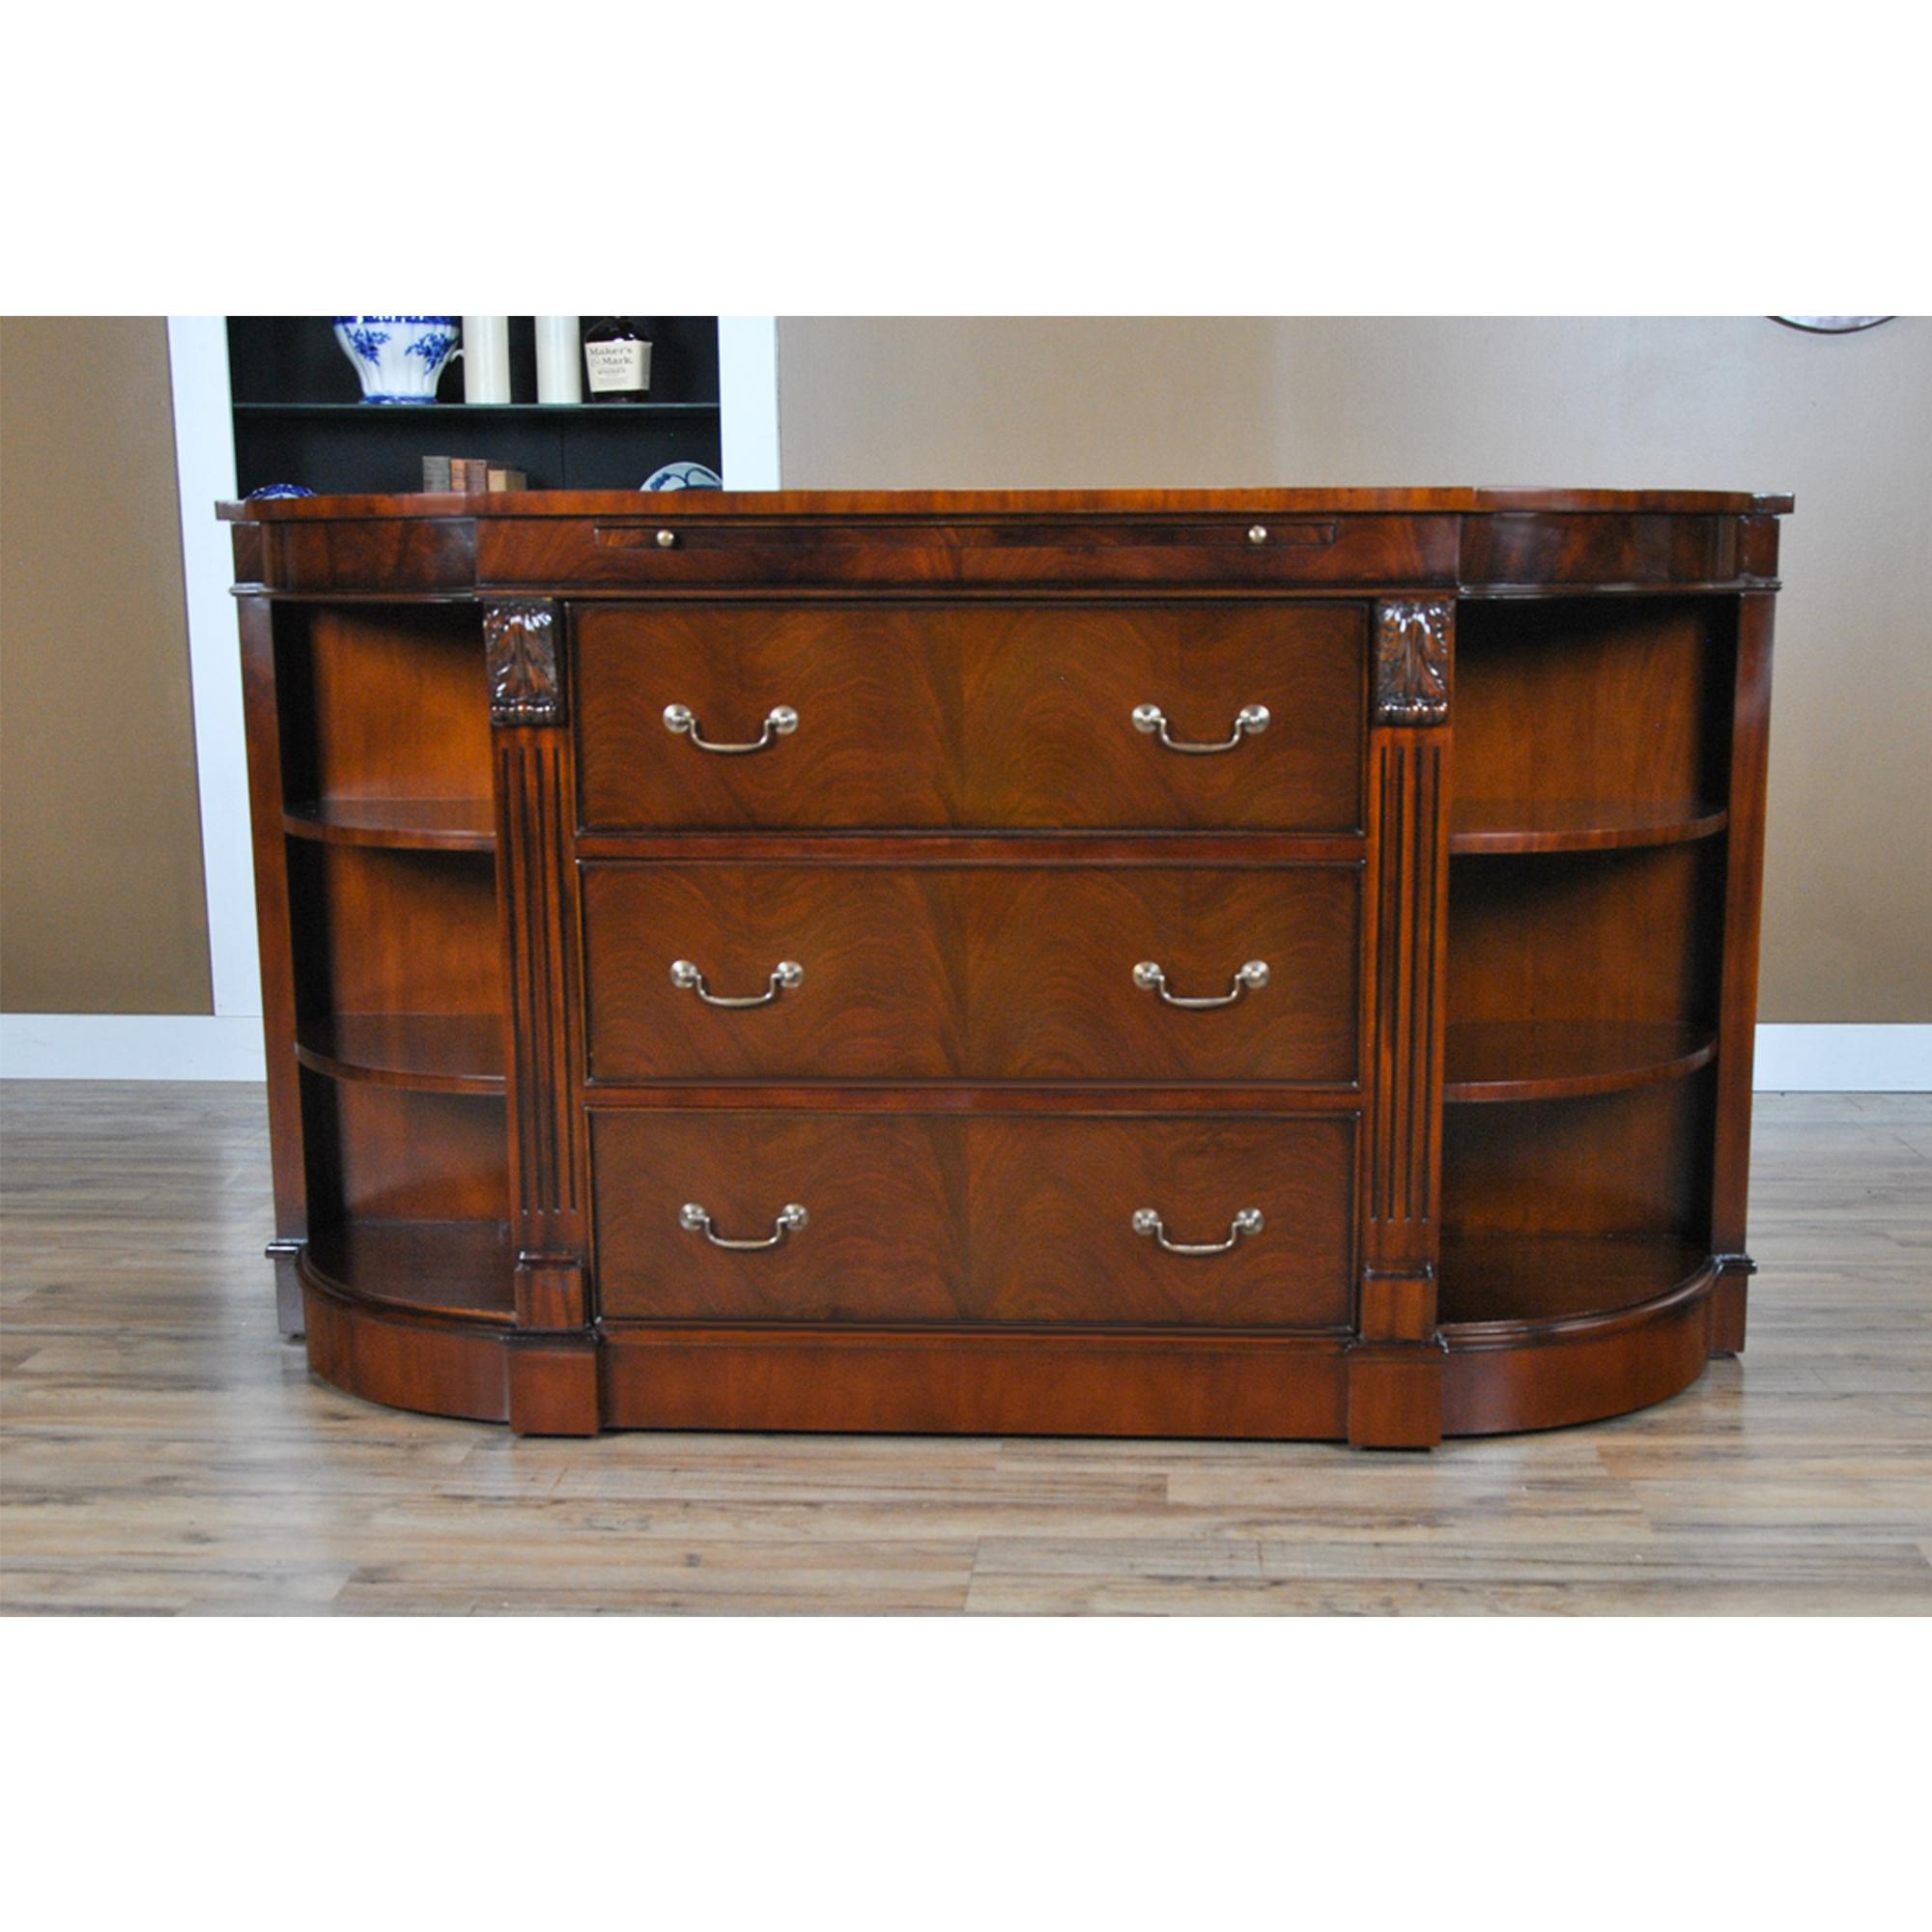 The Niagara Furniture Mahogany Credenza with Pullout Slide. This stylish piece has fantastic details throughout; including a genuine full grain leather inset pull out tray, beautiful, solid brass drawer pulls, hand carved solid mahogany carvings and